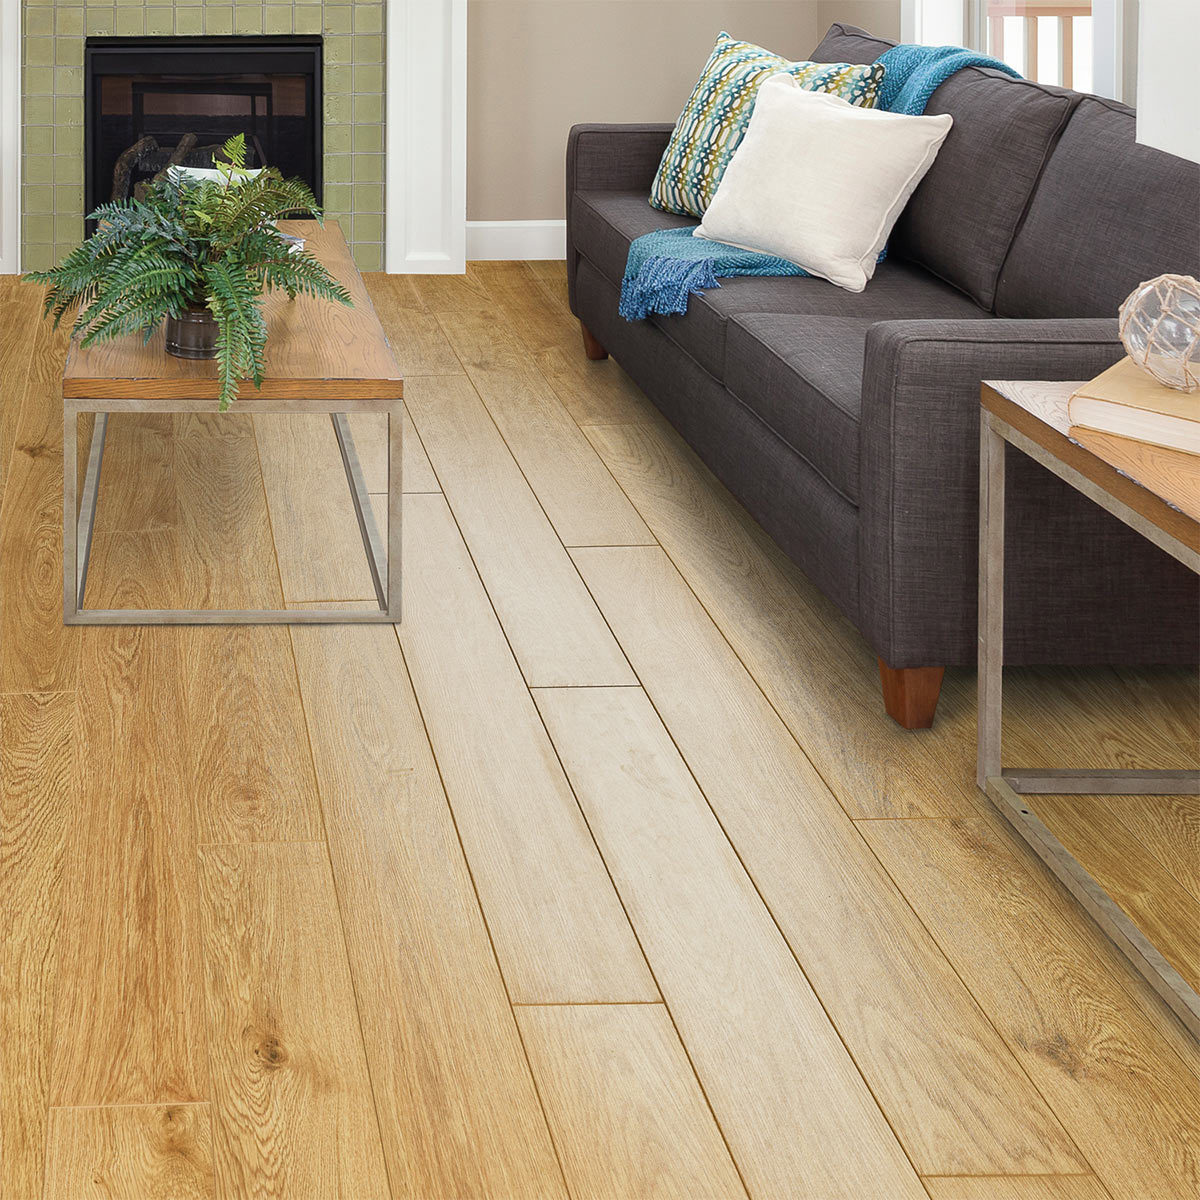 5 Best Laminate Flooring Colours For, How To Choose Color Of Laminate Flooring